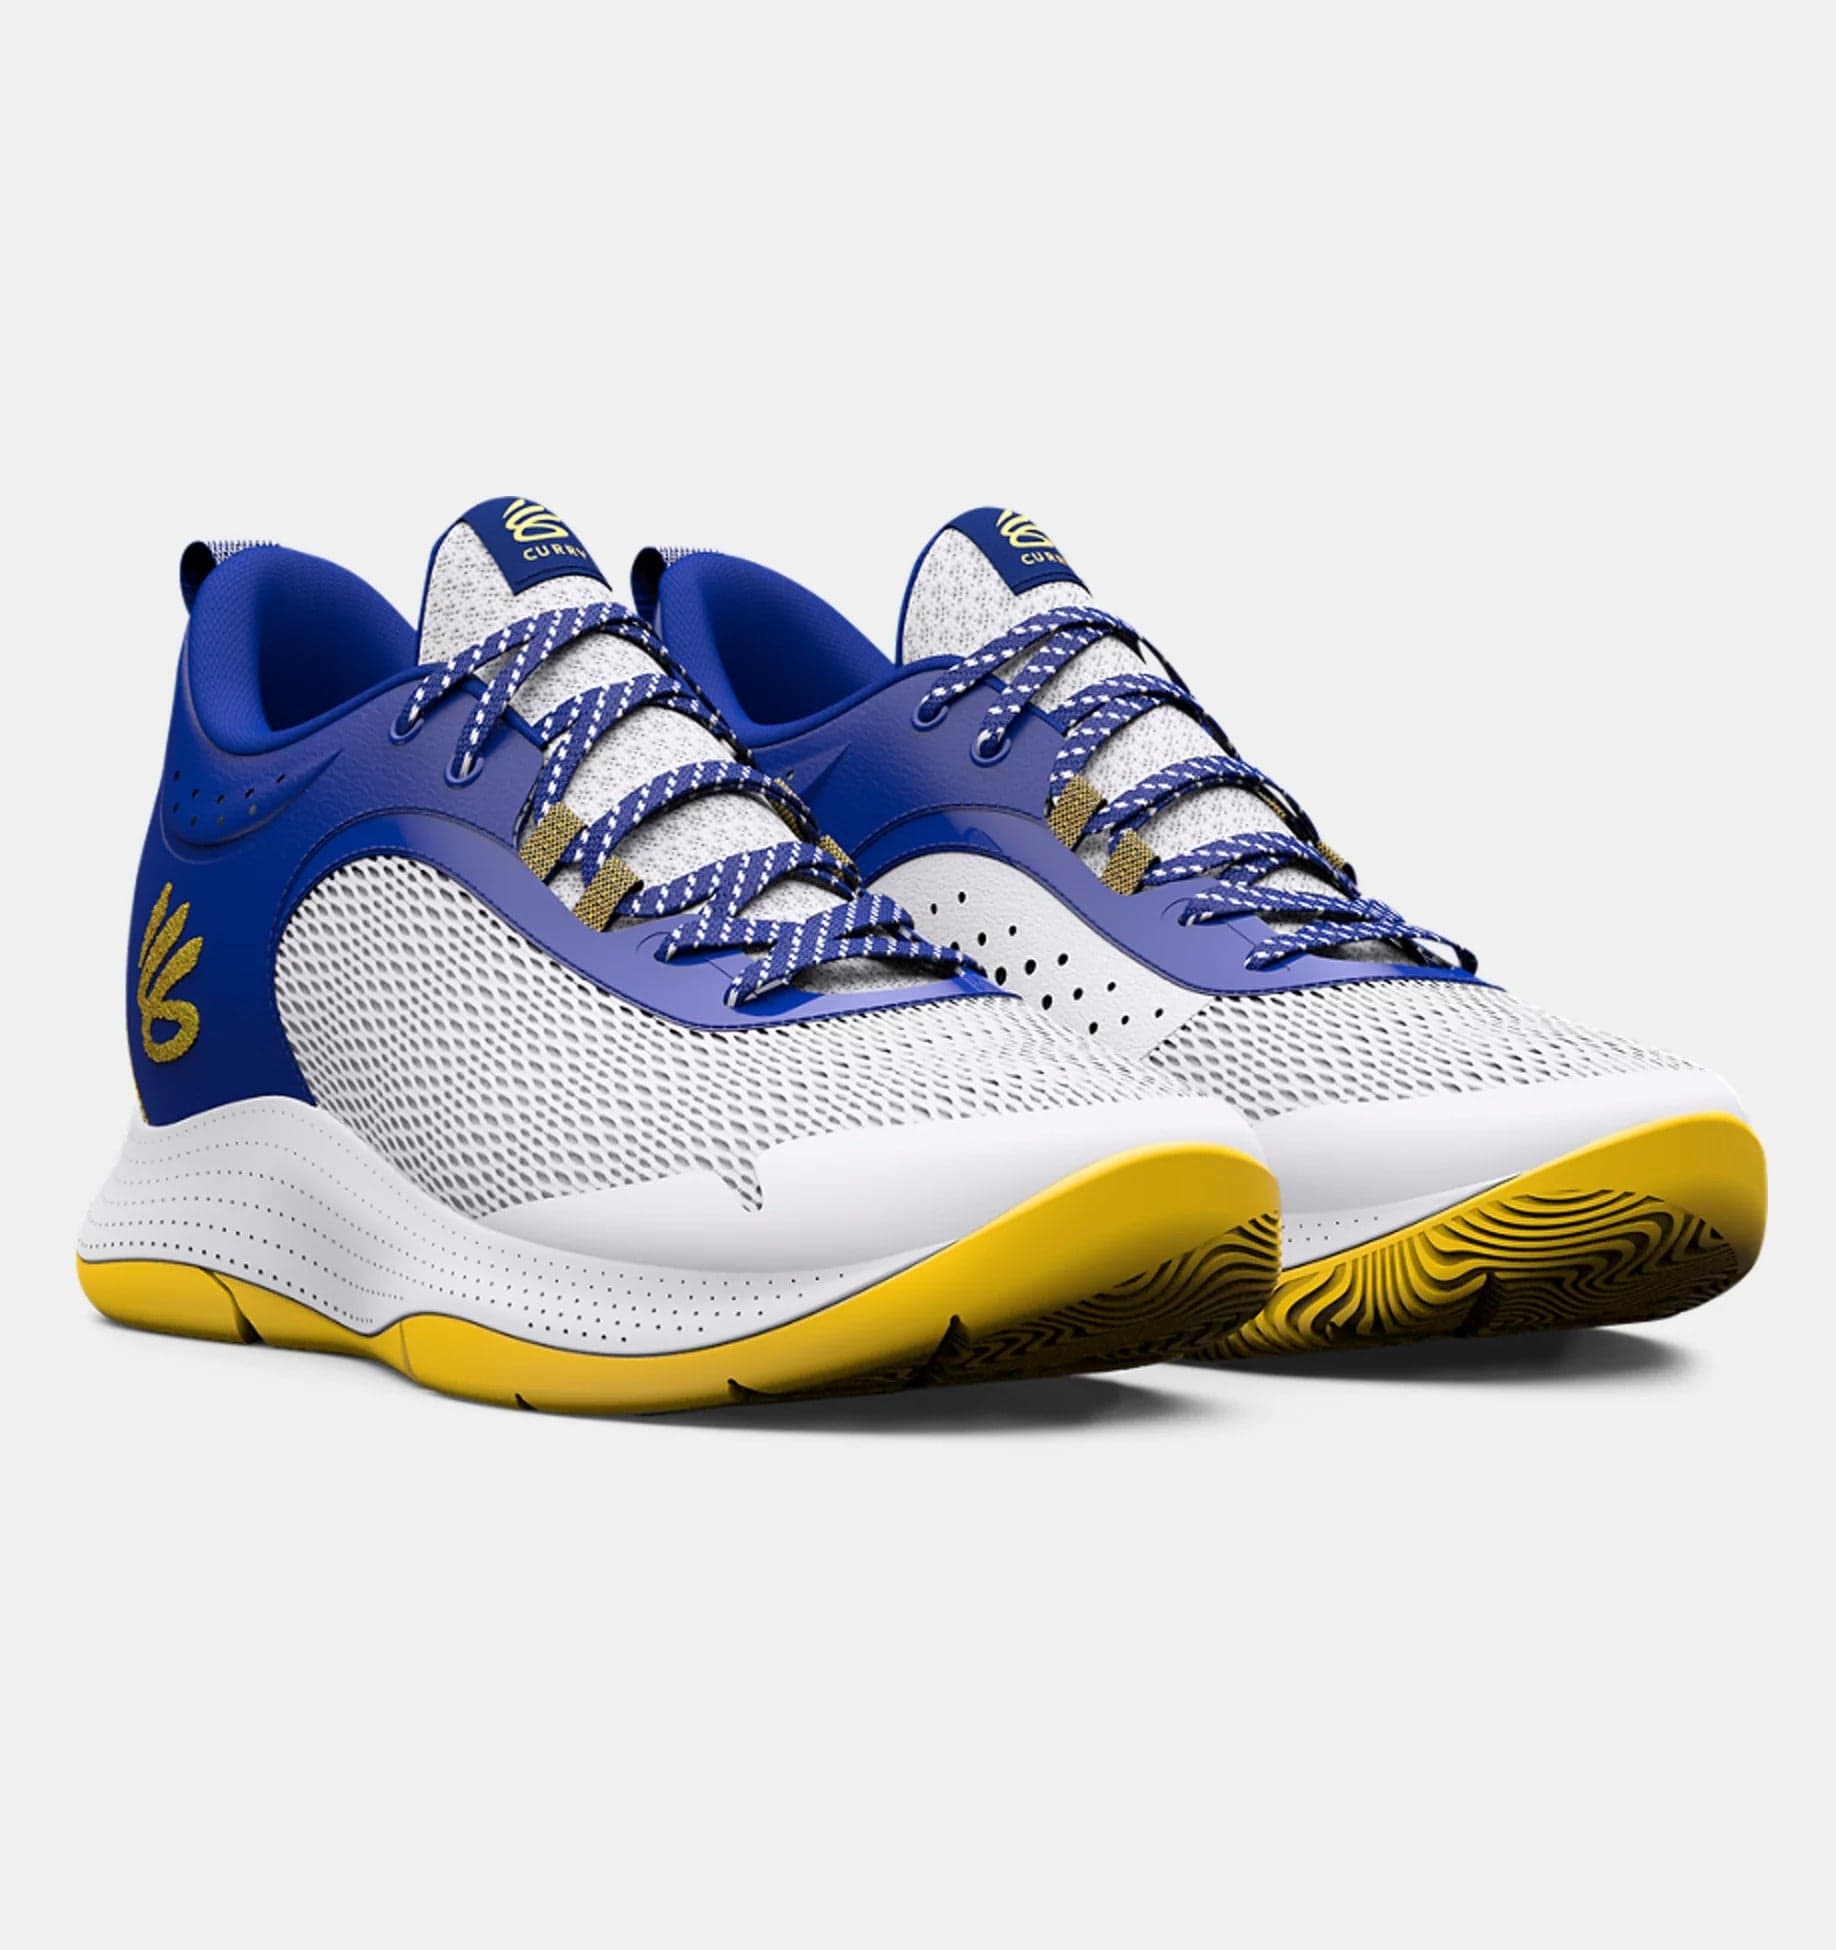 Curry 3Z6 Basketball Shoes